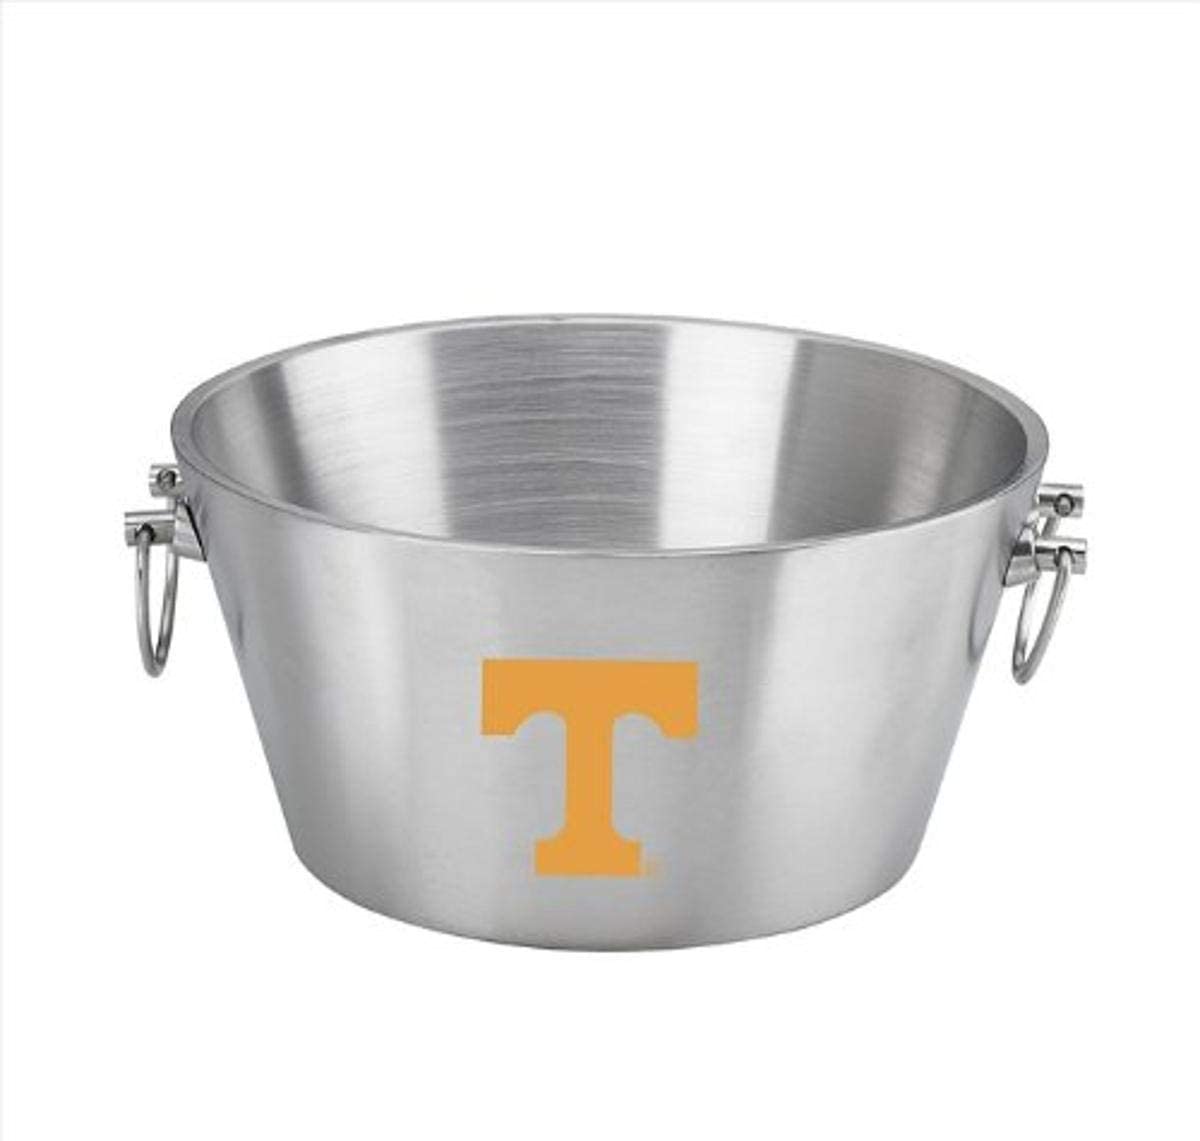 NCAA Tennessee Volunteers Doublewall Insulated Stainless Steel Party Tub, 15-Inch